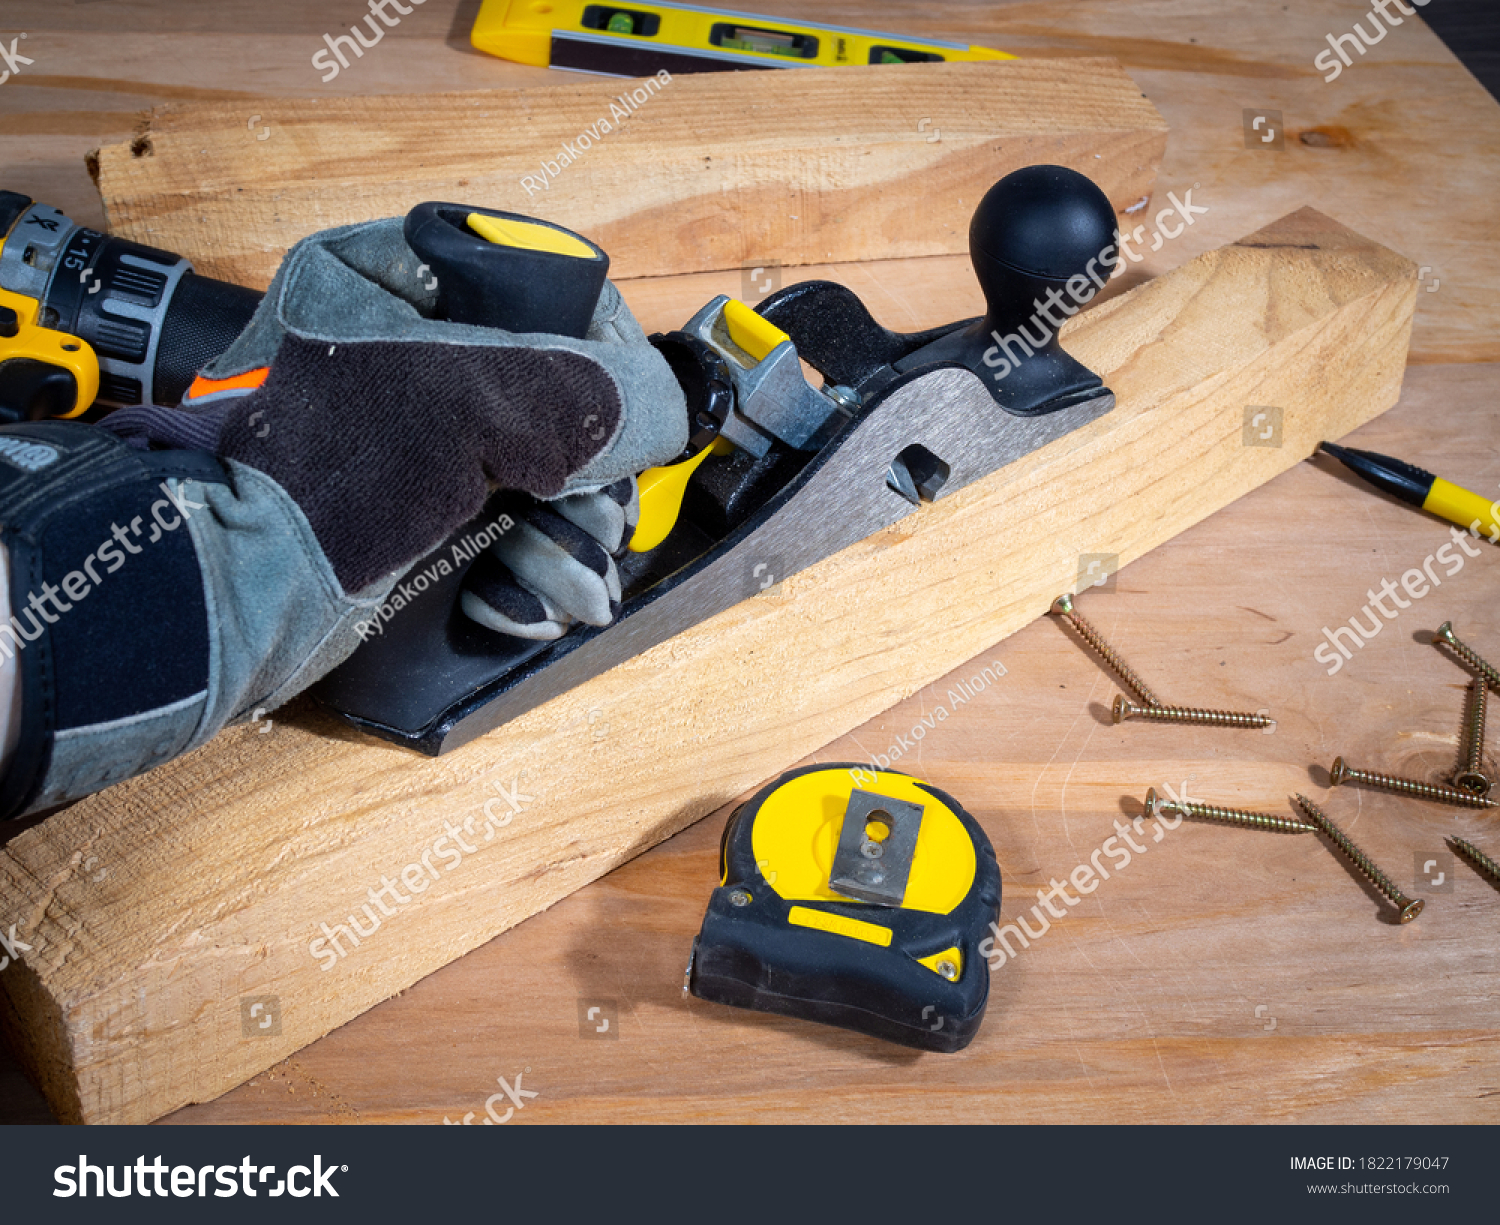 Hand in a safety glove keeping plane tool above the wooden bar, tape measure, screws and instruments around.  #1822179047